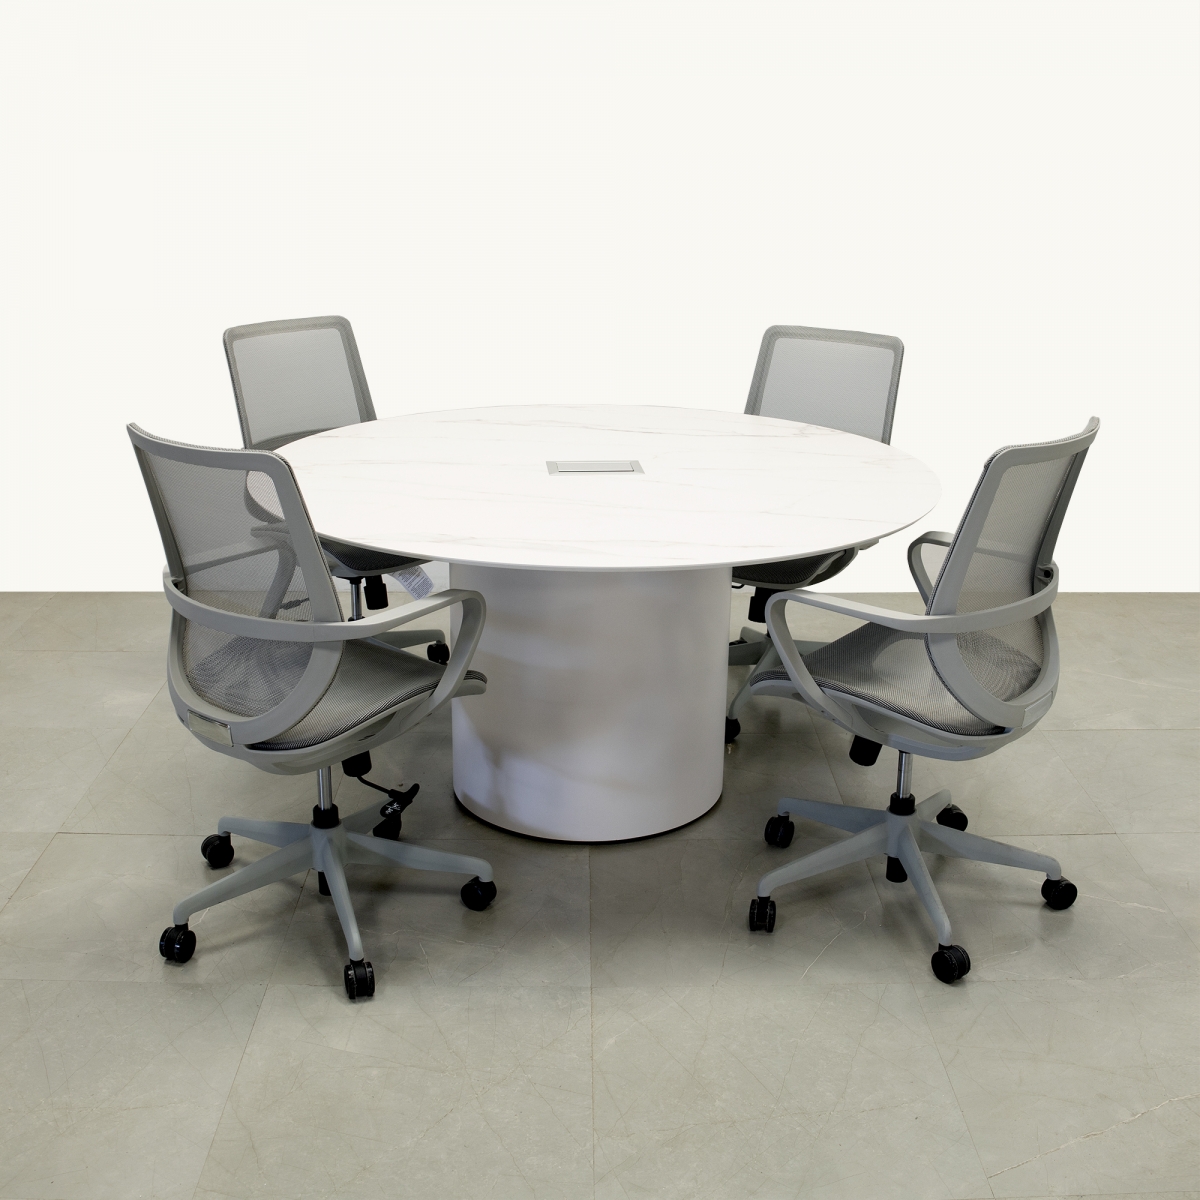 60 In. Round Conference Solene Stone top Table- Stock #1000-S